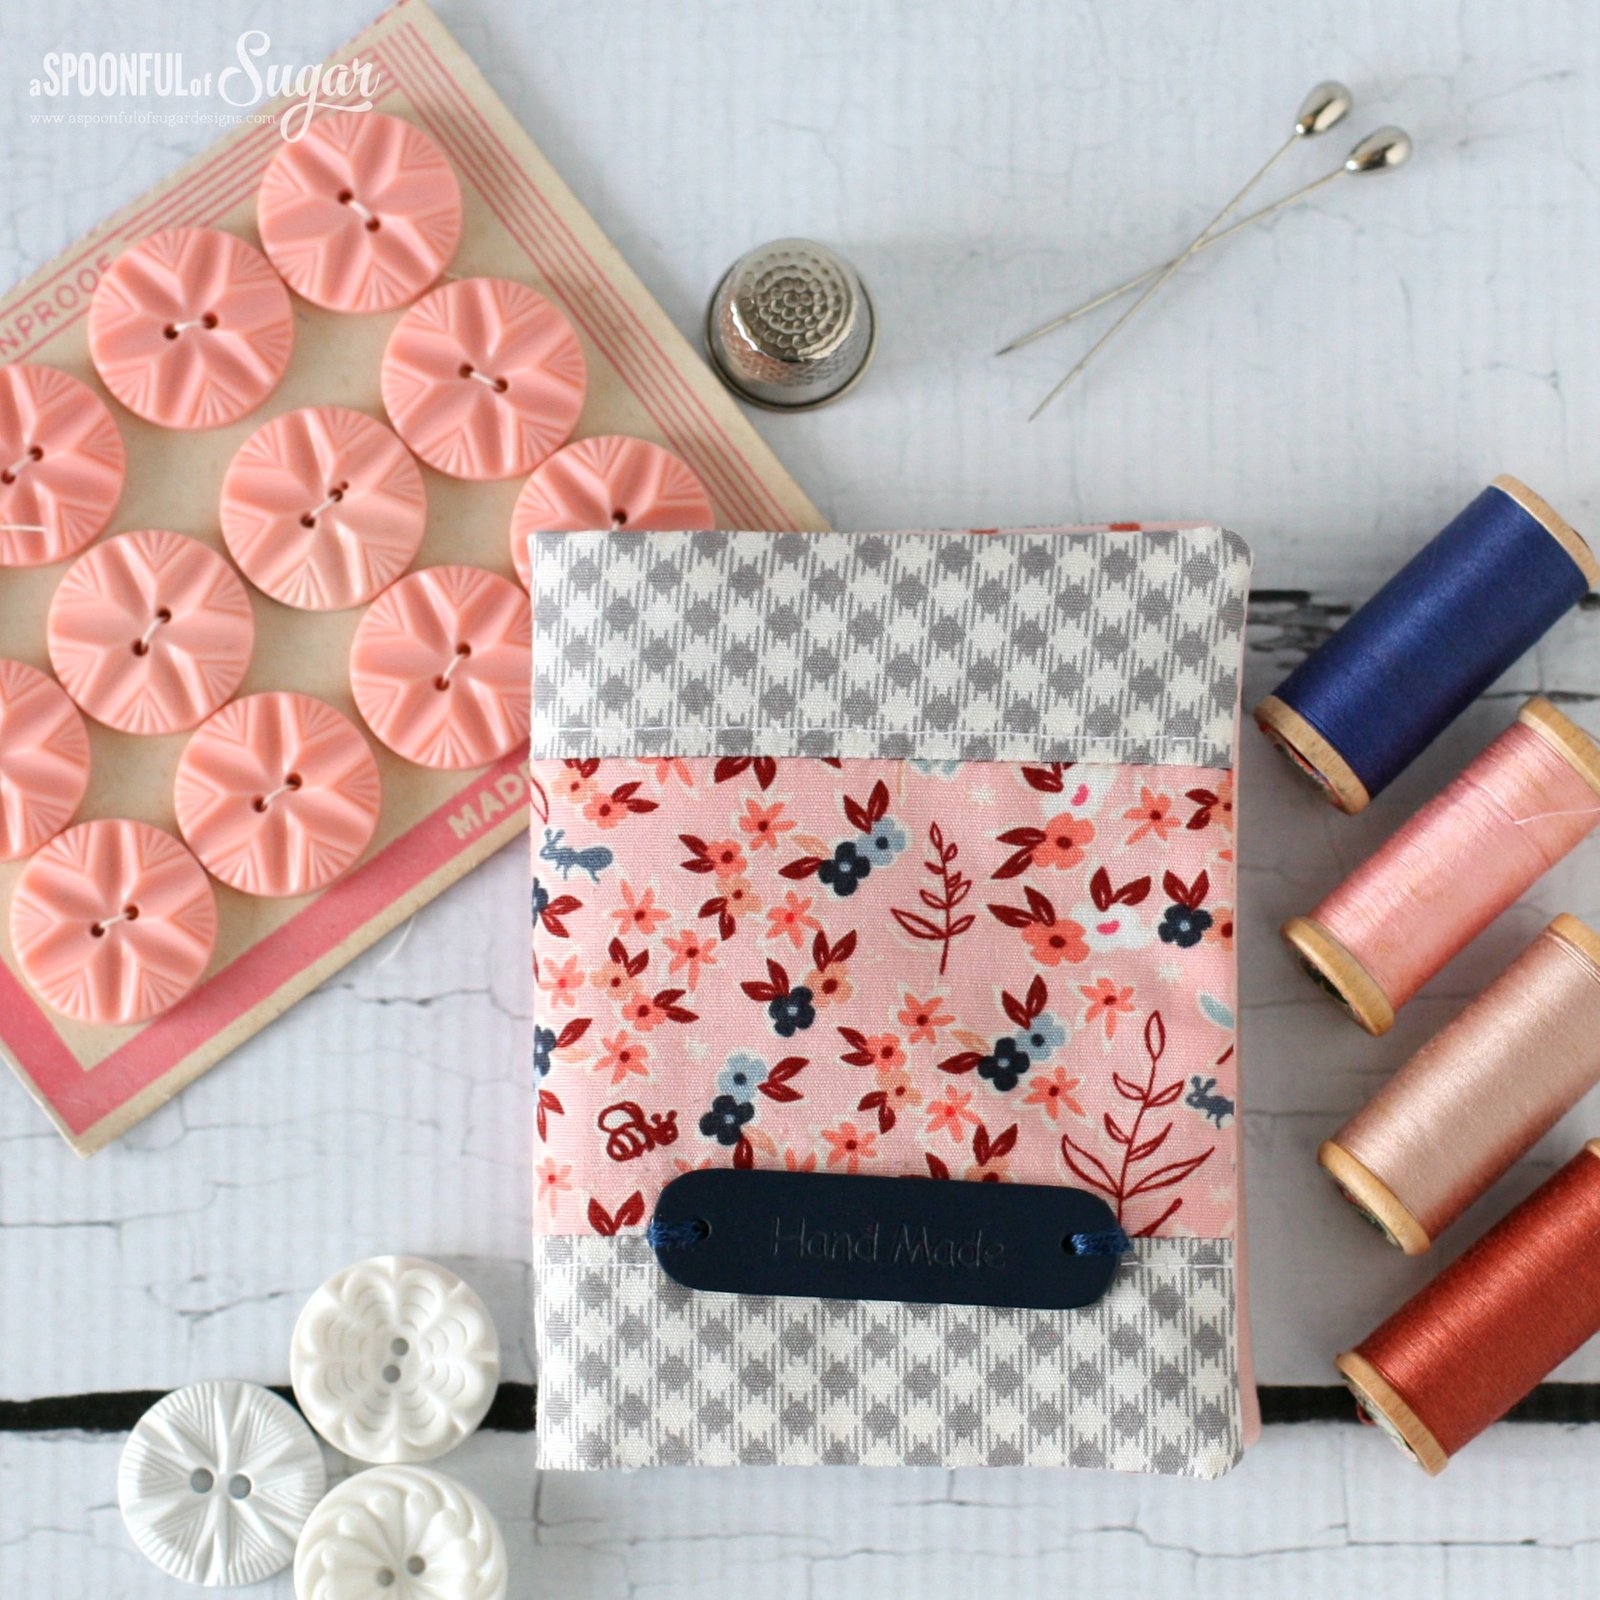 How to sew a card holder - a free sewing tutorial from A Spoonful of Sugar